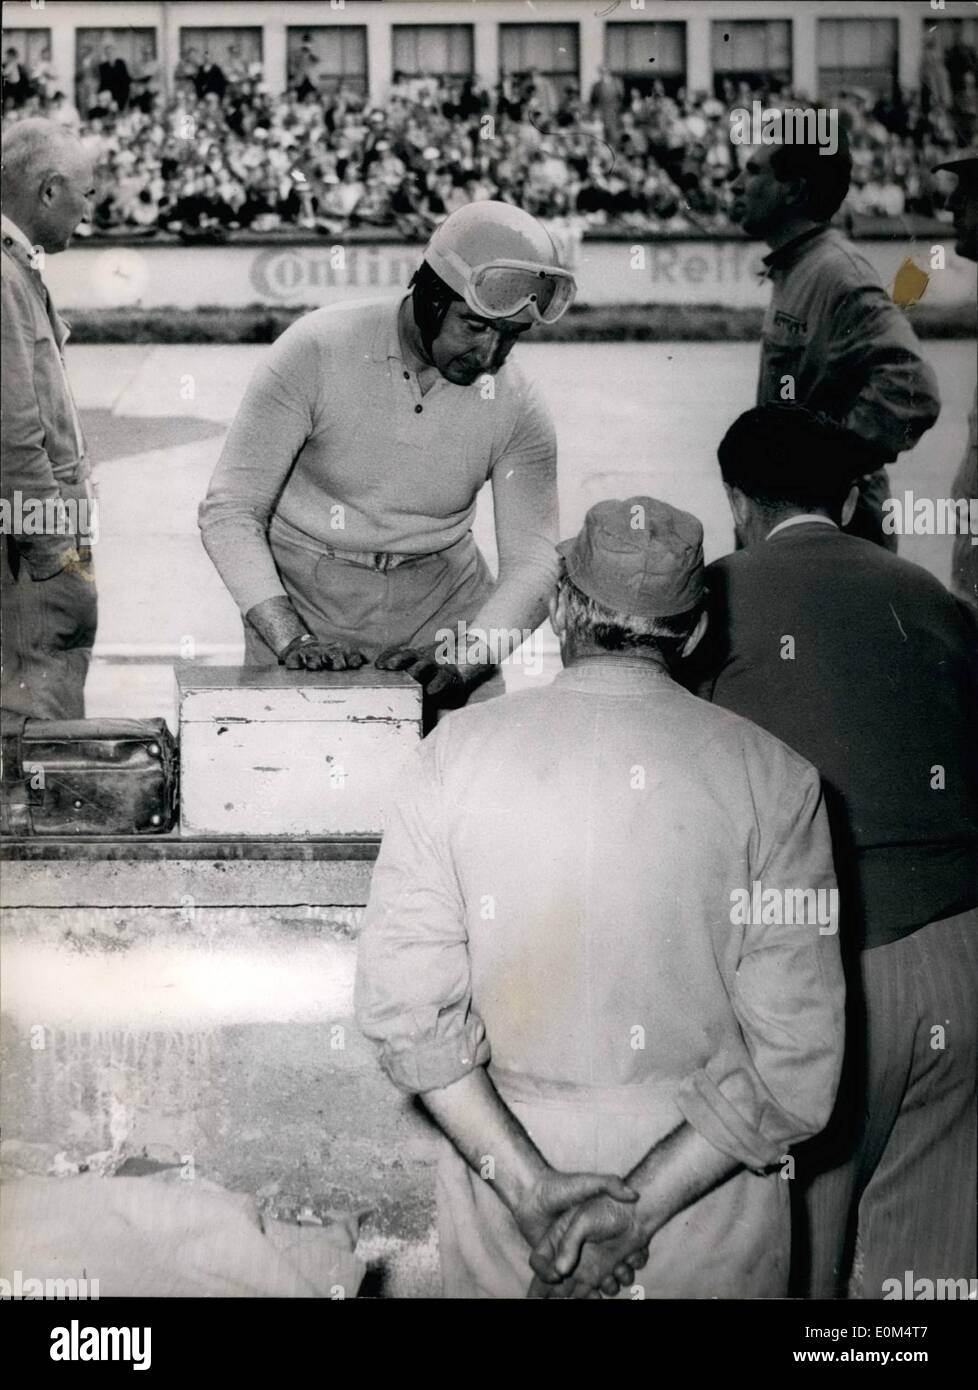 Aug. 08, 1953 - Famous Italian driver Alberto Ascari is pictured here at the Nuerburgring. Ministers Malraux and Maurice-Bokanowsky Leave Cabinet Meeting Stock Photo